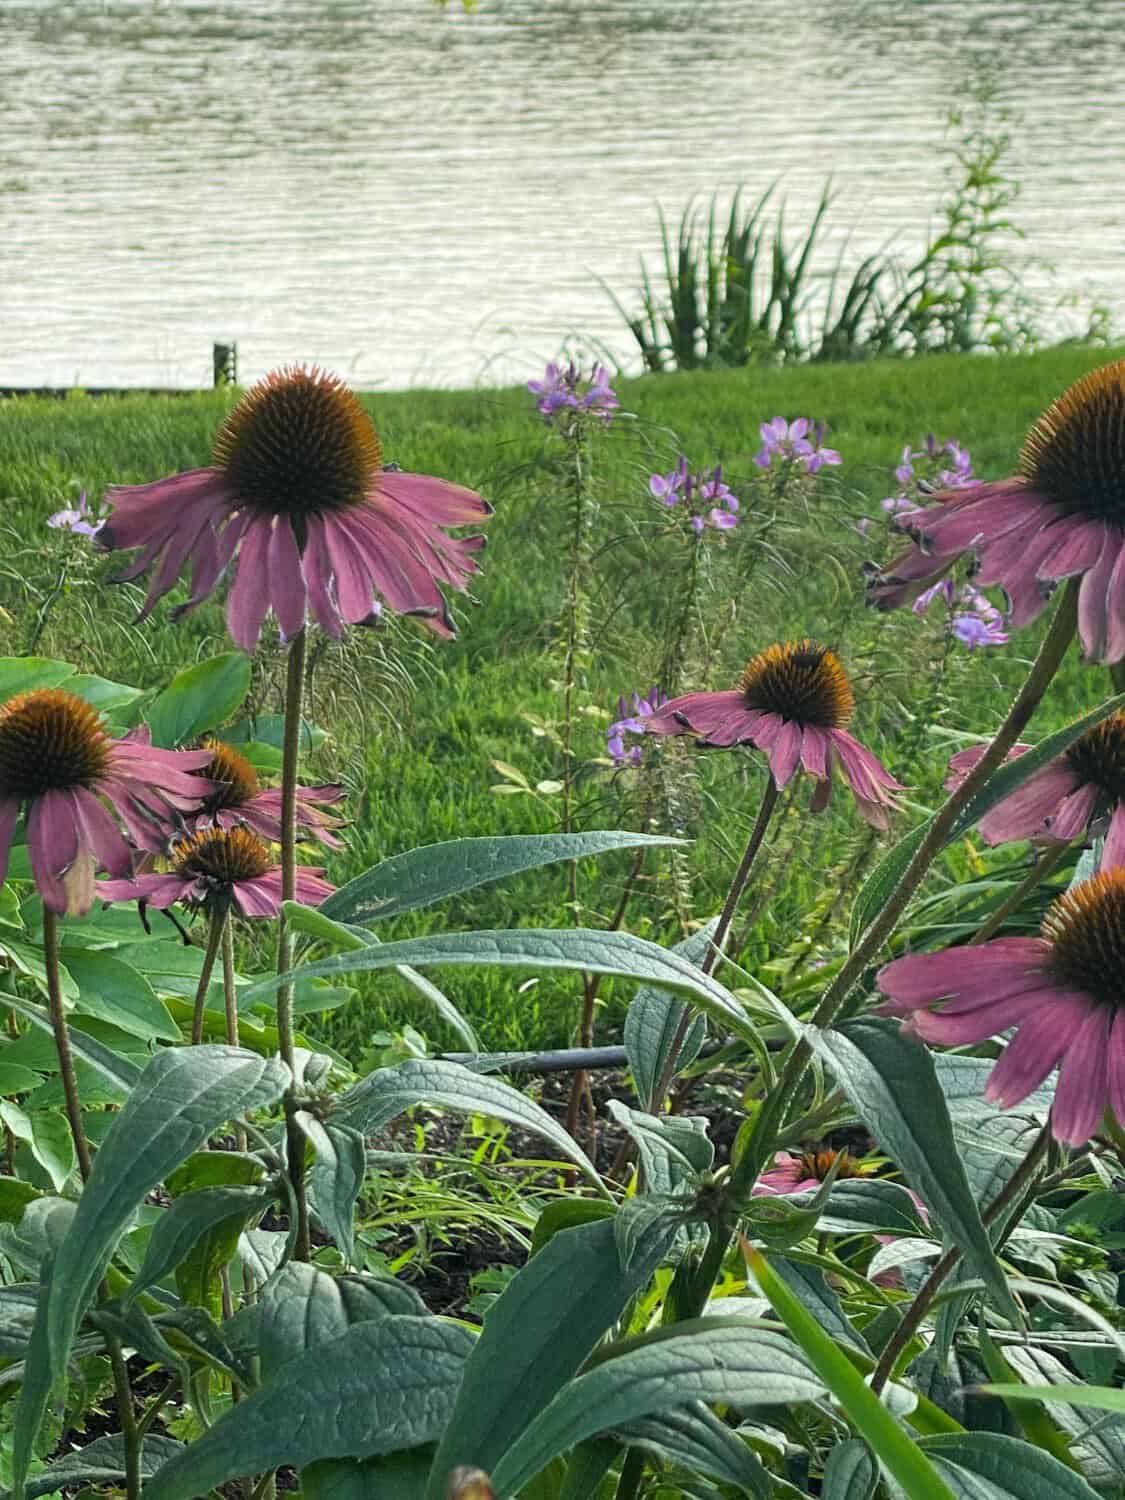 purple coneflowers with the river and cleome flowers in the background